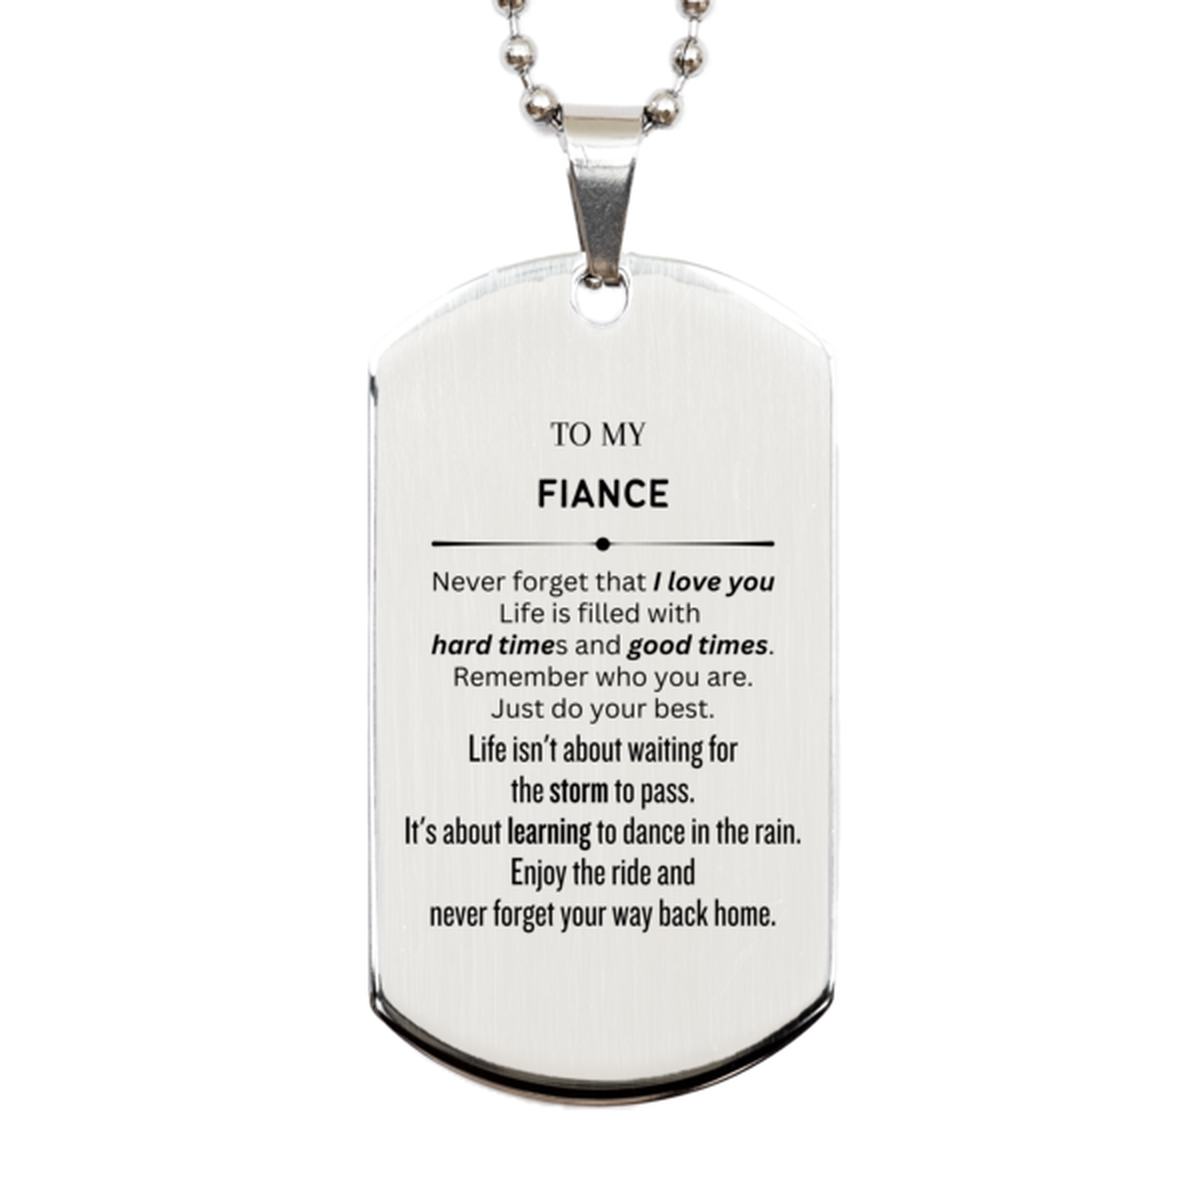 Christmas Fiance Silver Dog Tag Gifts, To My Fiance Birthday Thank You Gifts For Fiance, Graduation Unique Gifts For Fiance To My Fiance Never forget that I love you life is filled with hard times and good times. Remember who you are. Just do your best